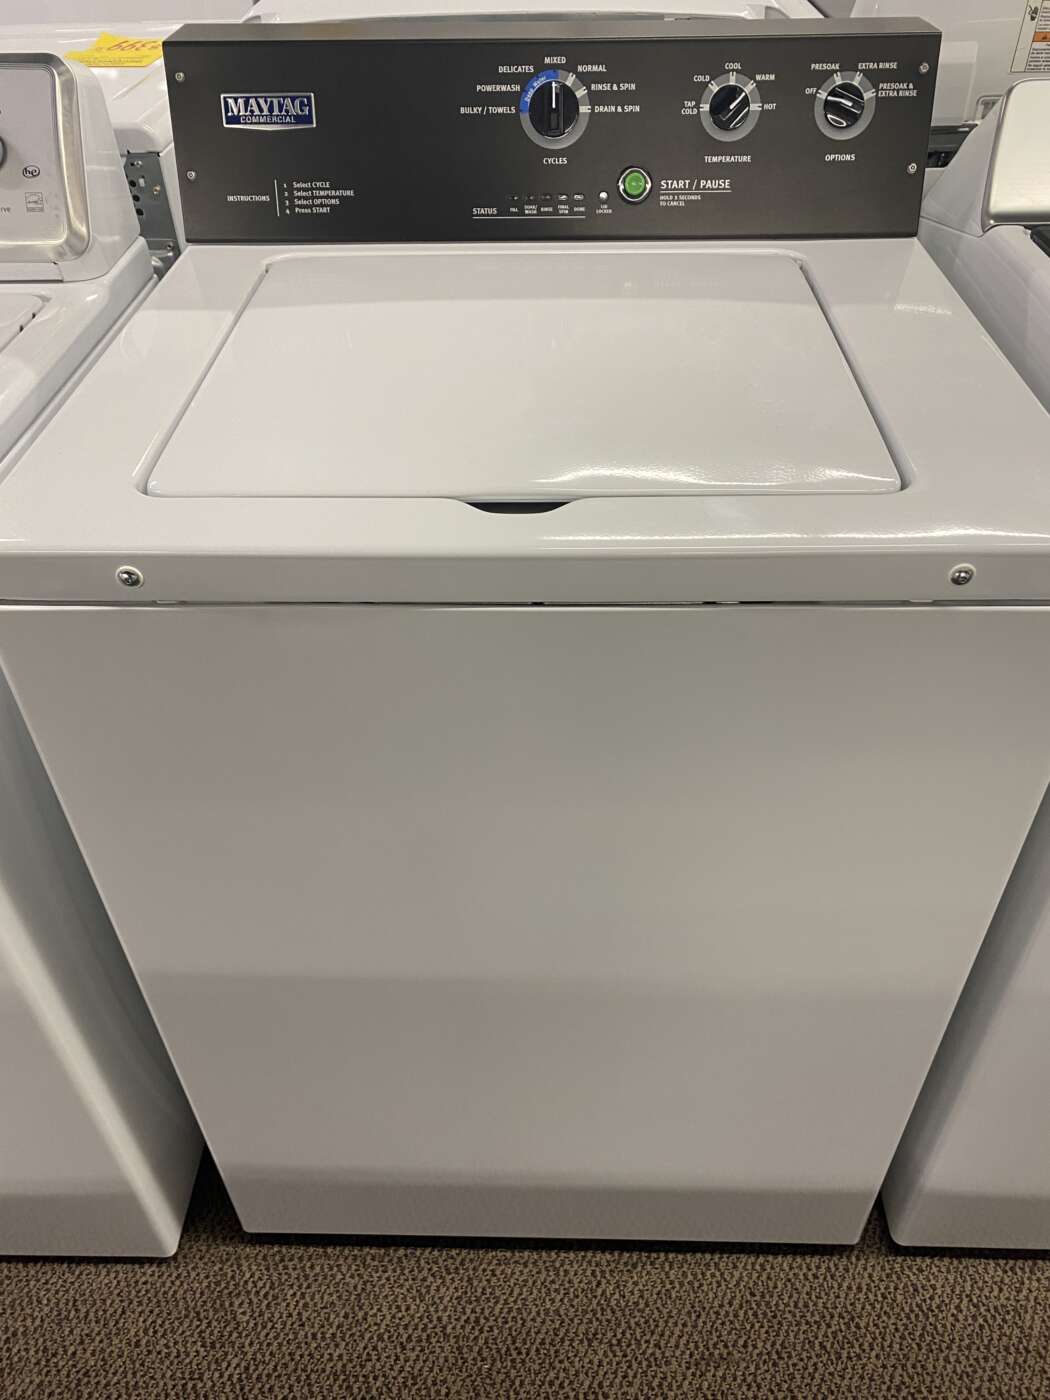 Reconditioned MAYTAG 3.5 Cu. Ft. Top Load Washer